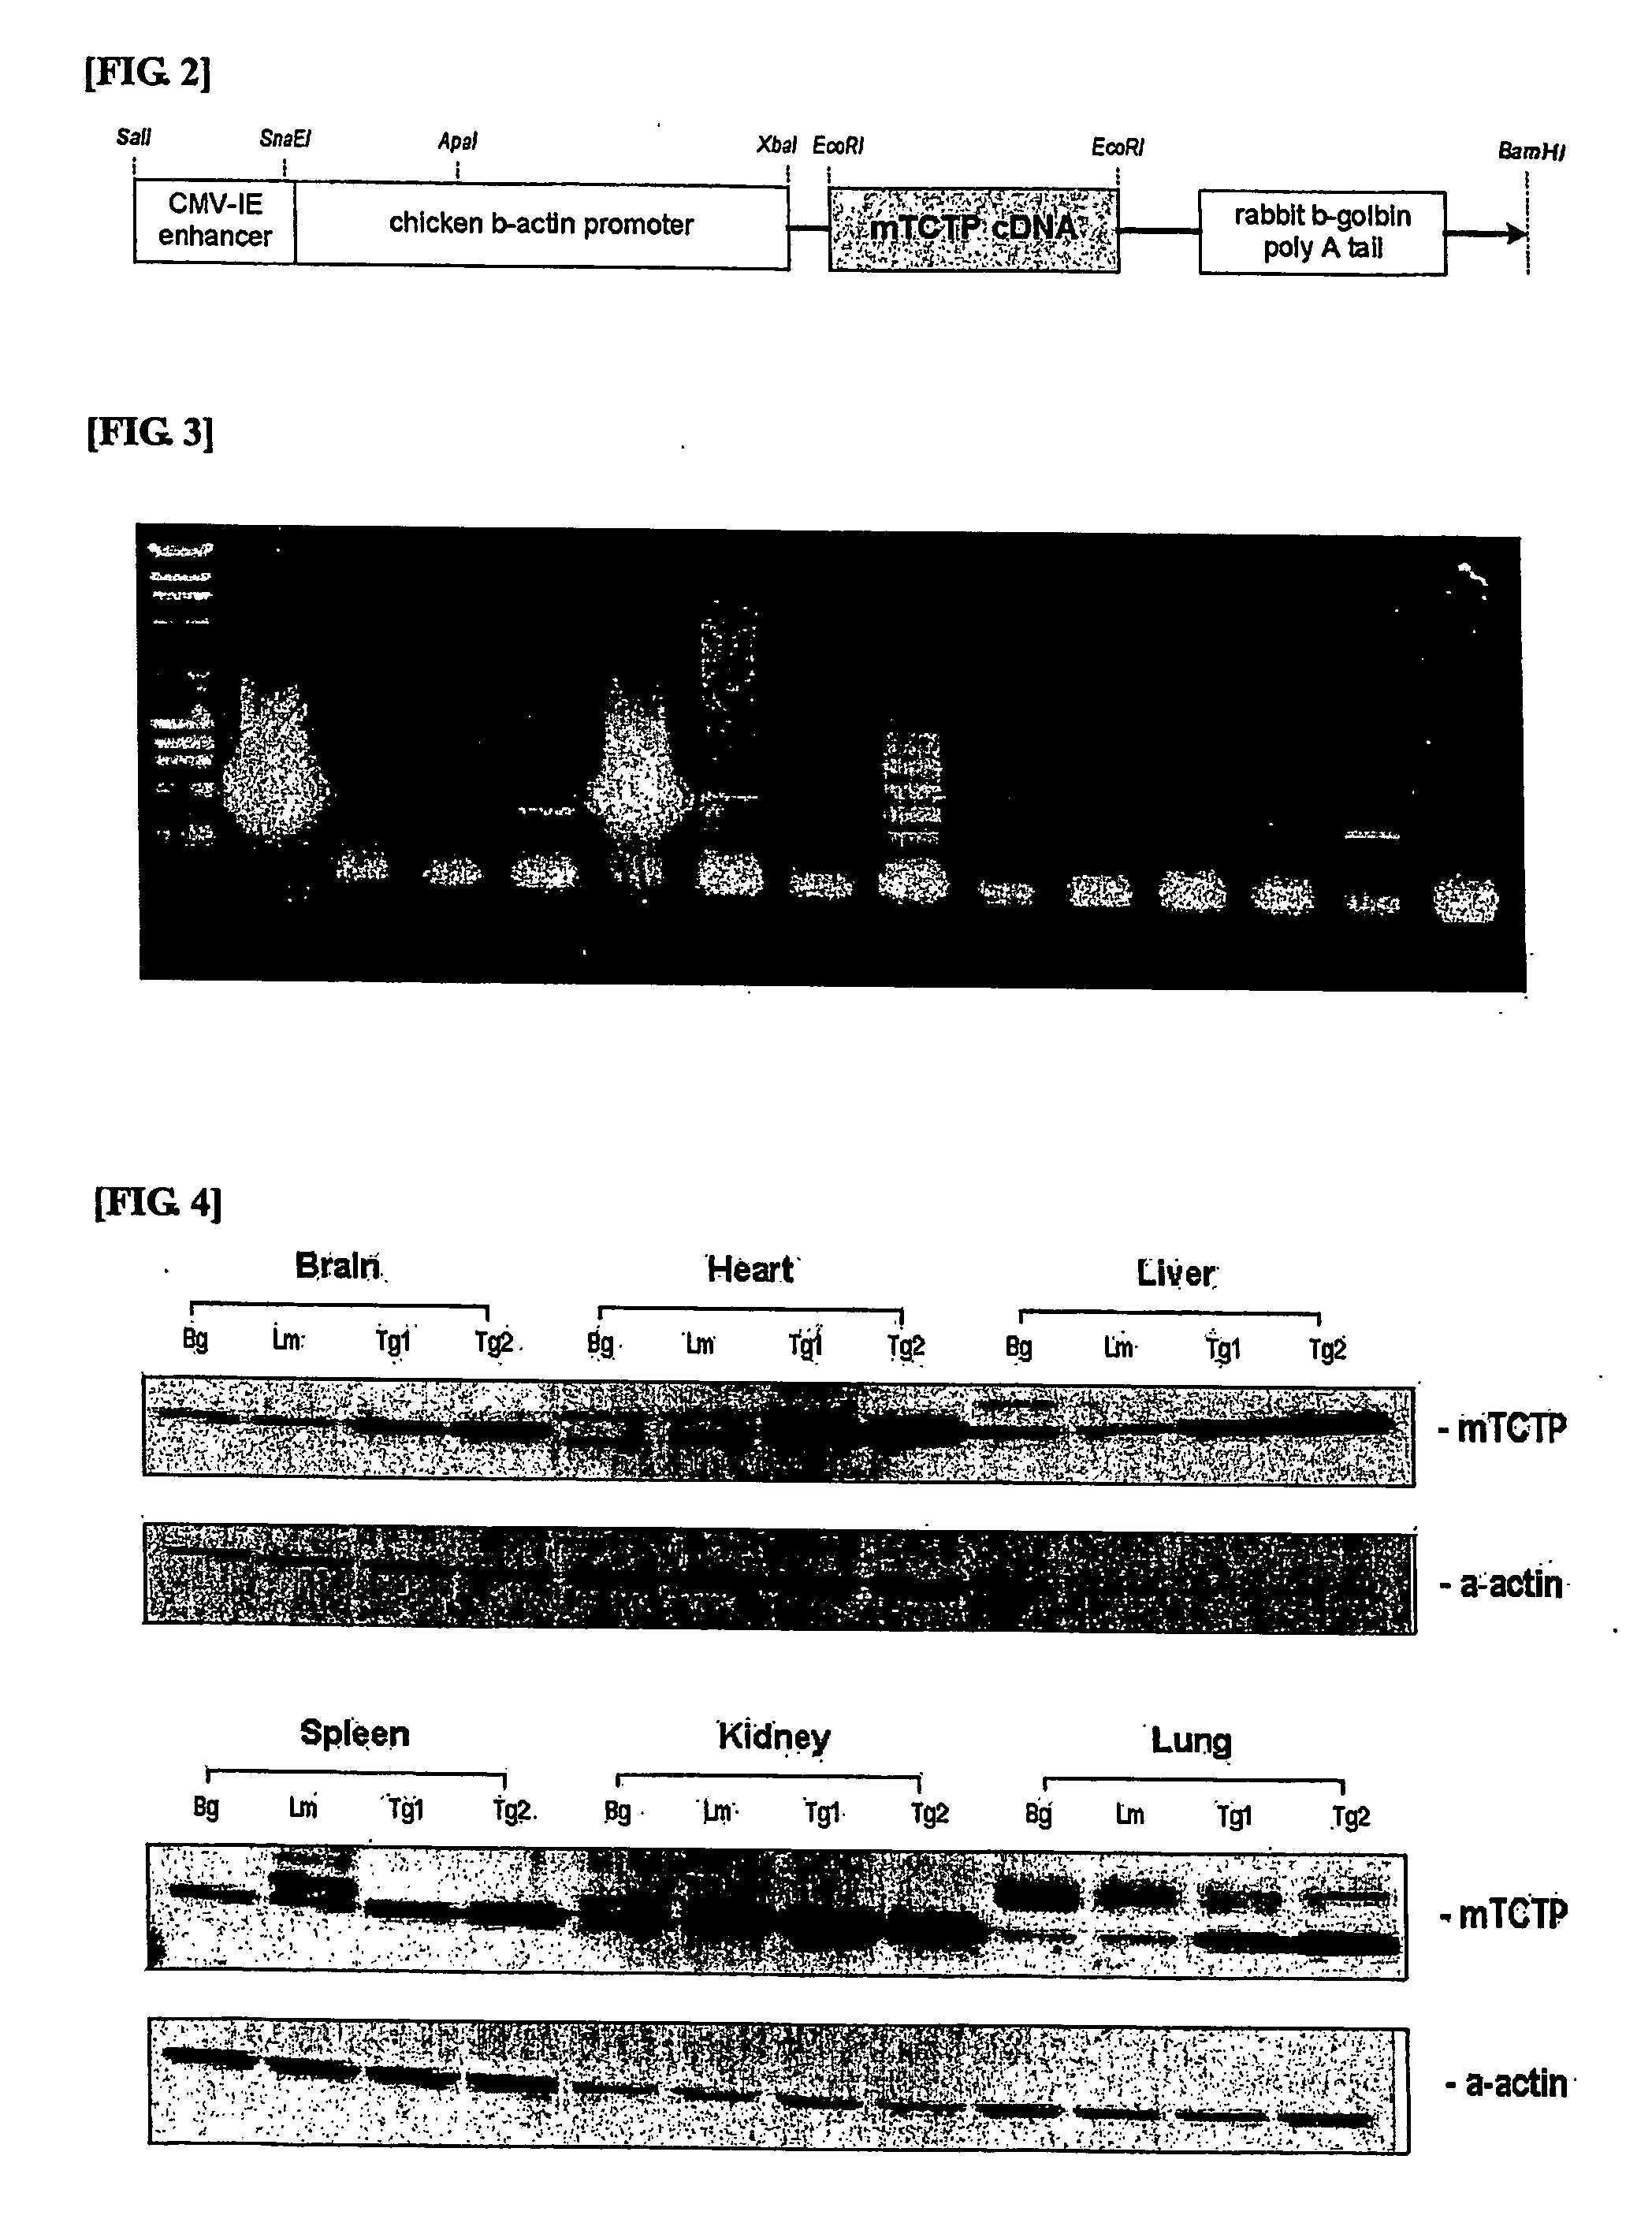 Composition For Screening Anti-Hypertension Drug Comprising Mammal Tctp Gene or Its Protein Product, and Method For Screening Anti-Hypertension Drug Using Said Composition